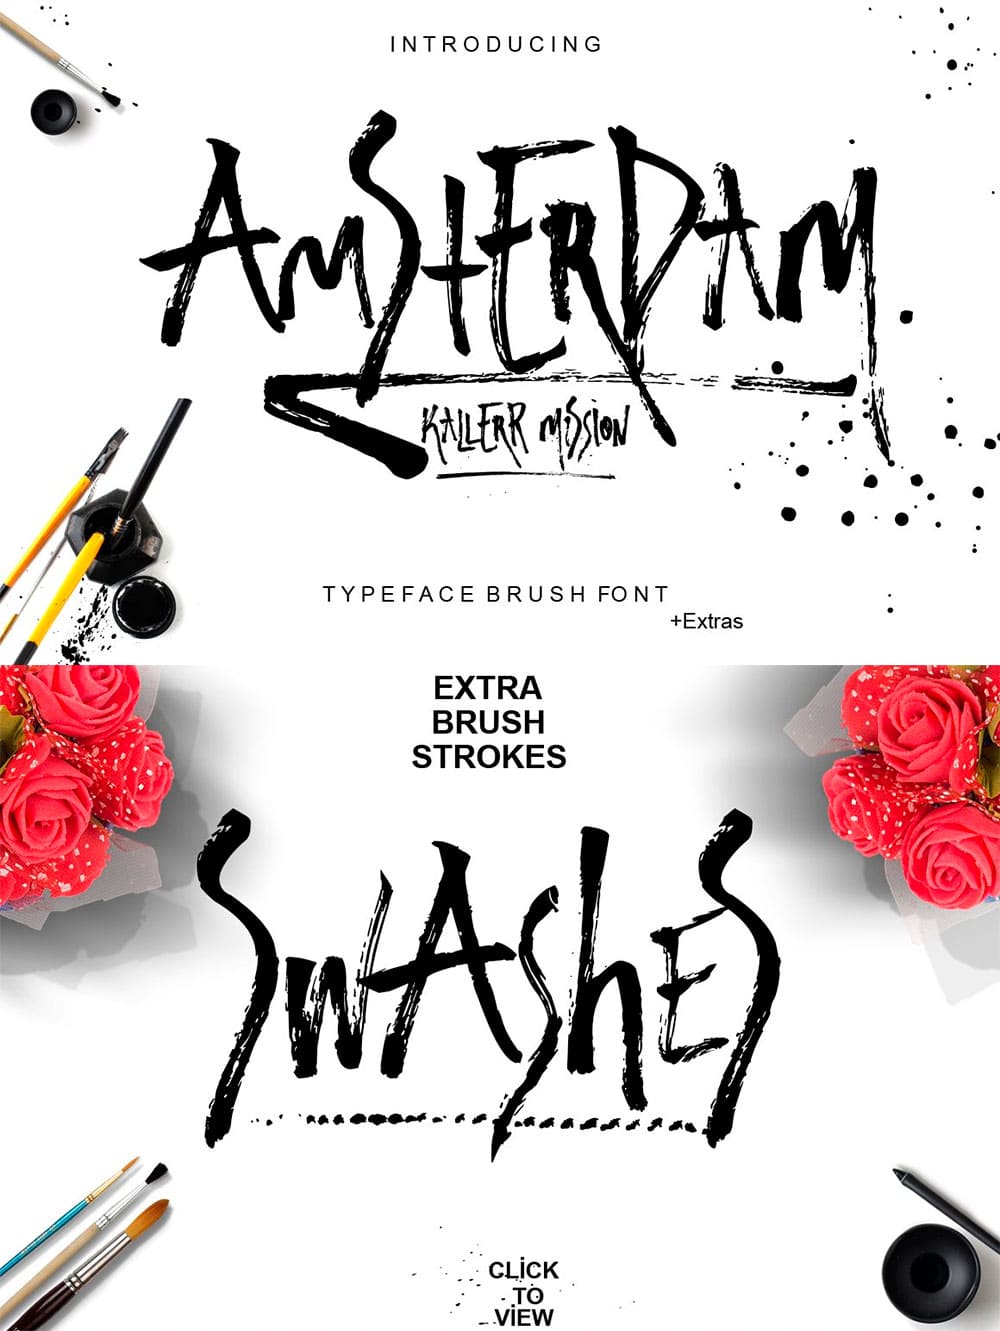 Amsterdam - Typeface Brush Font, picture for pinterest 1000x1331.